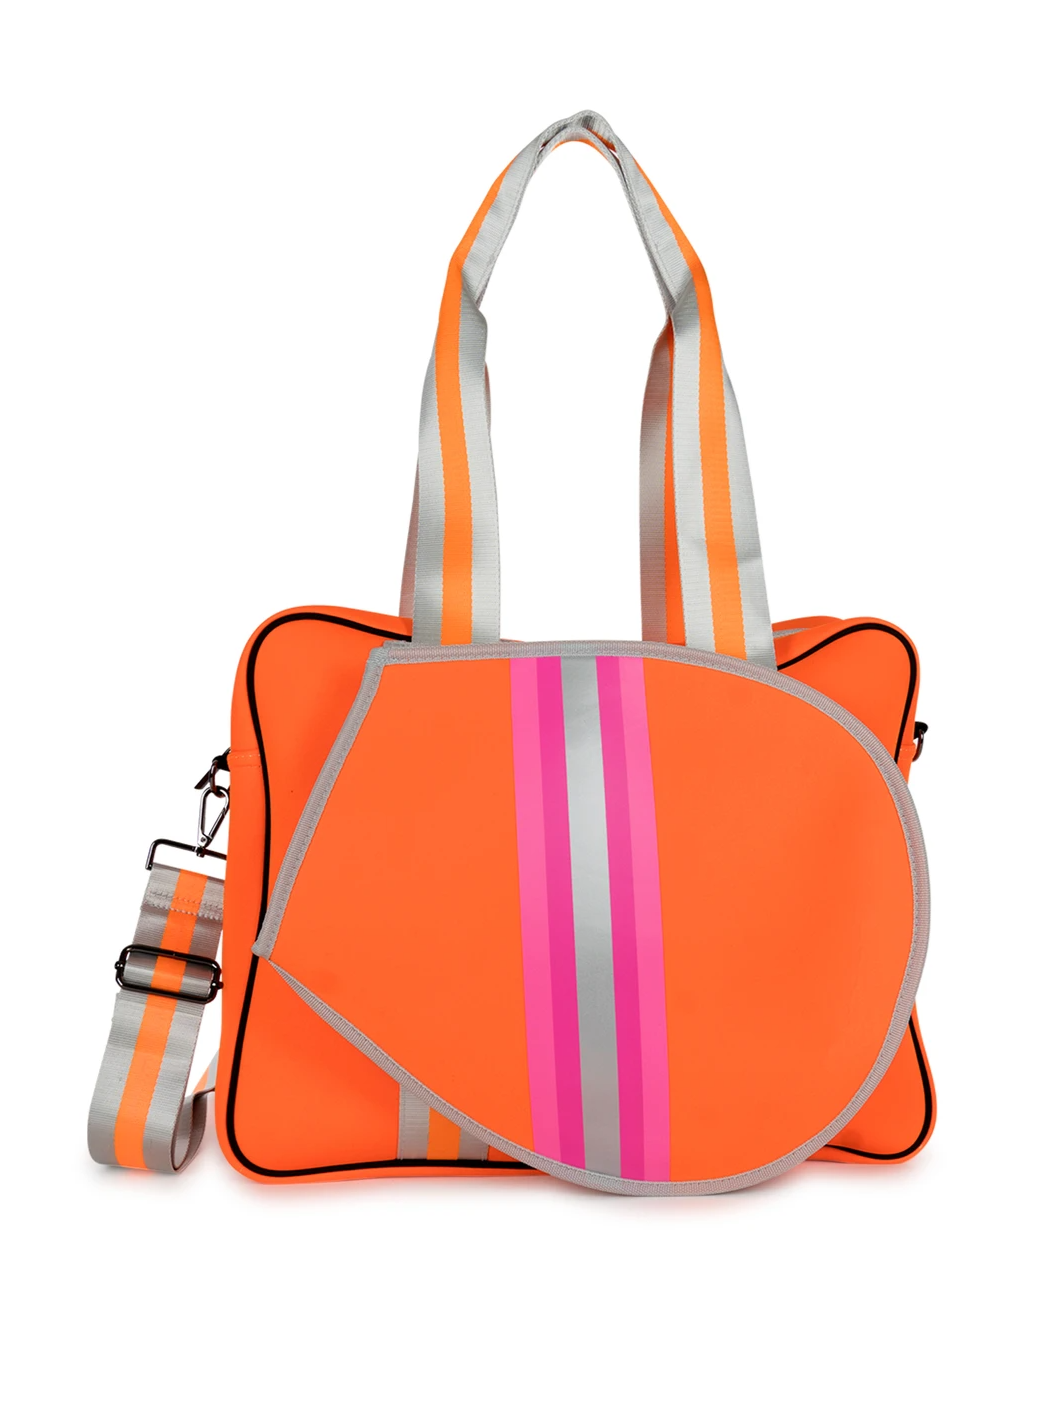 Haute Shore Billie Tennis Bag in Color WOW bright orange with hot pink and silver detailing